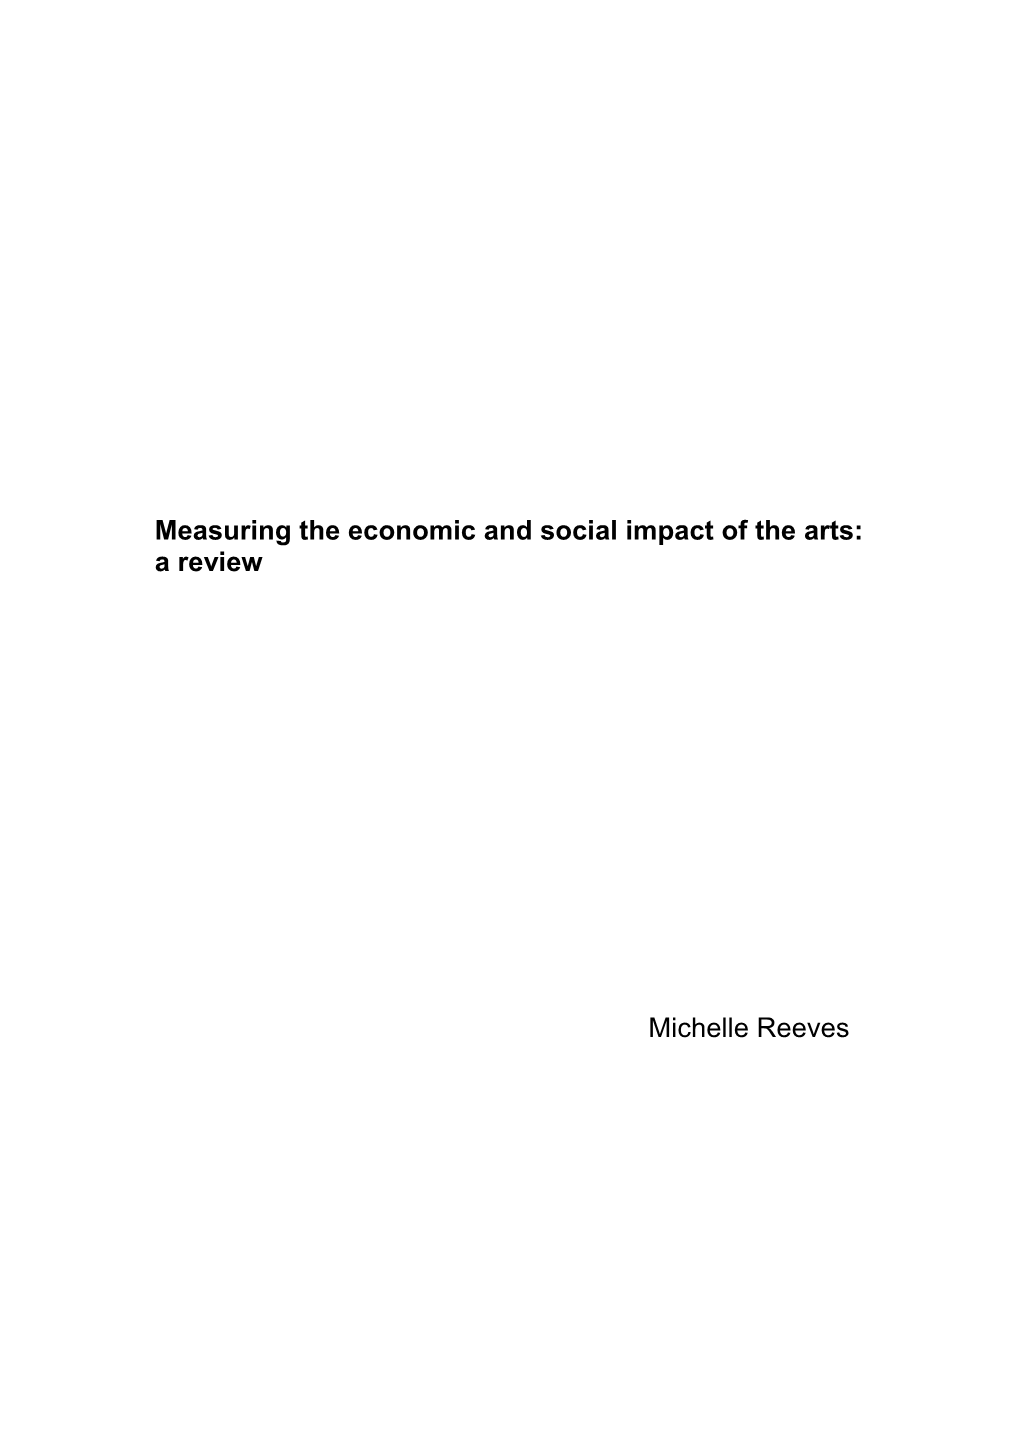 Measuring the Economic and Social Impact of the Arts: a Review